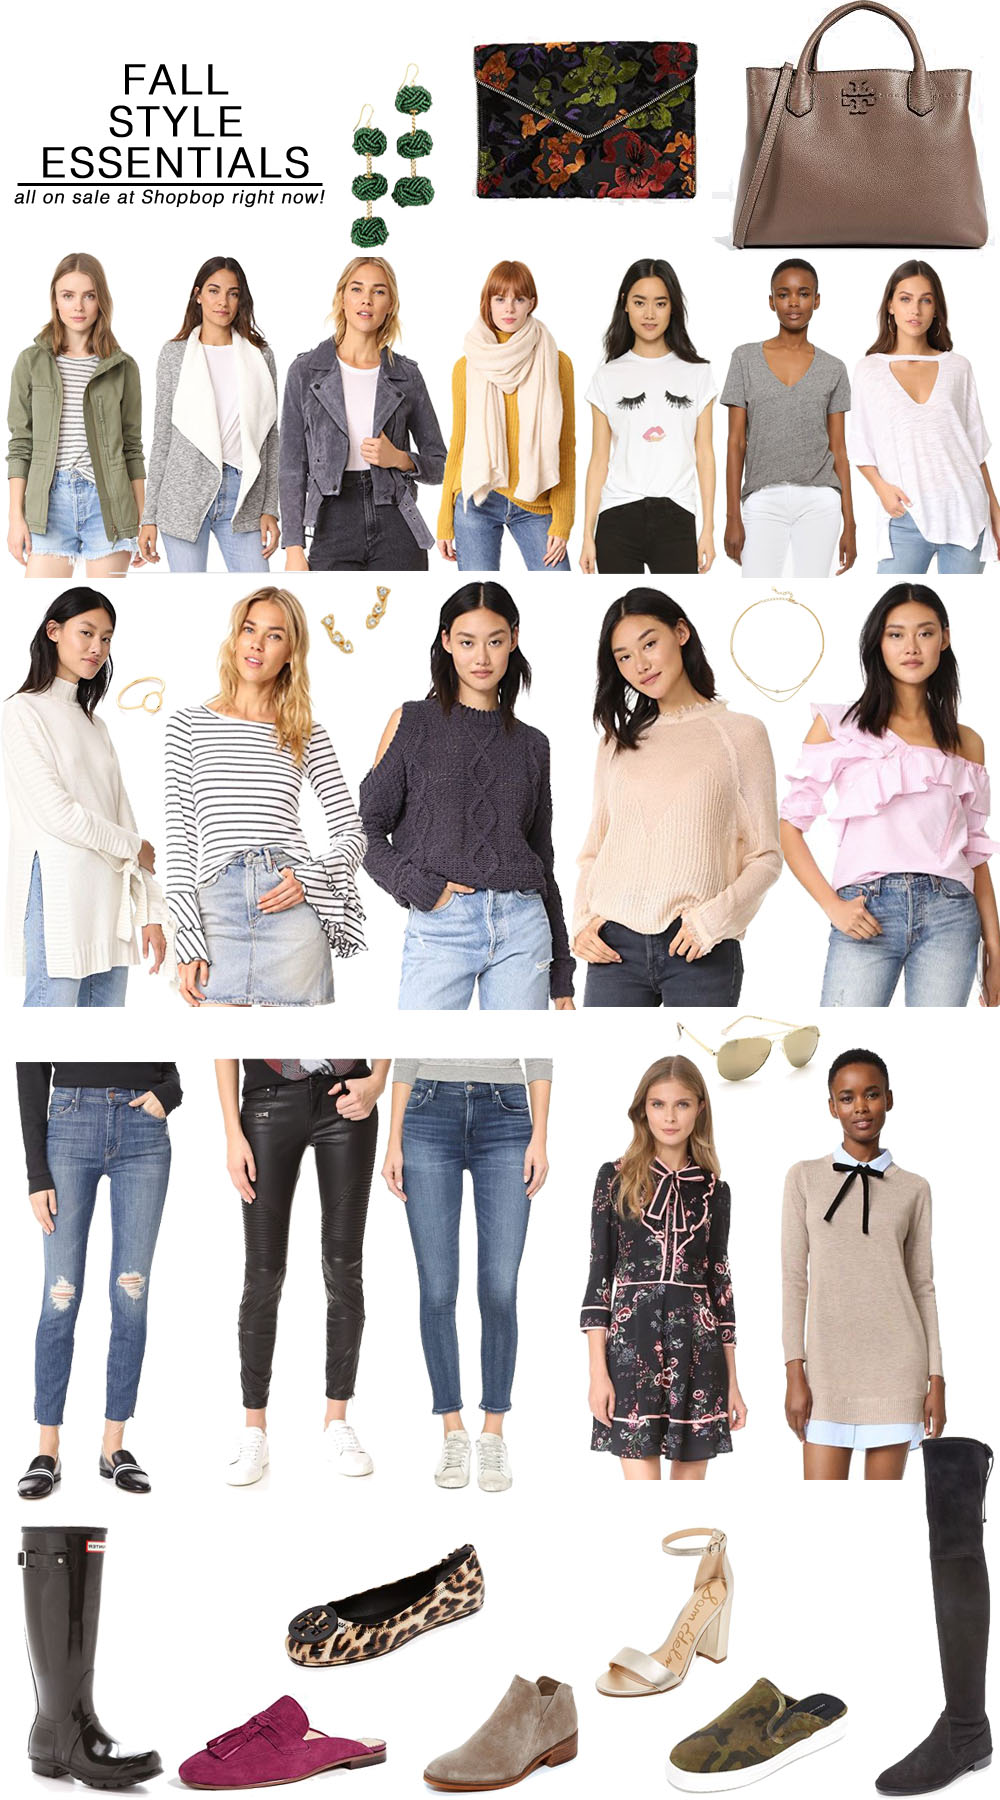 Best Fall Style Essentials from Shopbop // the modern savvy, a life & style blog - Fall Style Essentials by popular Florida style blogger The Modern Savvy